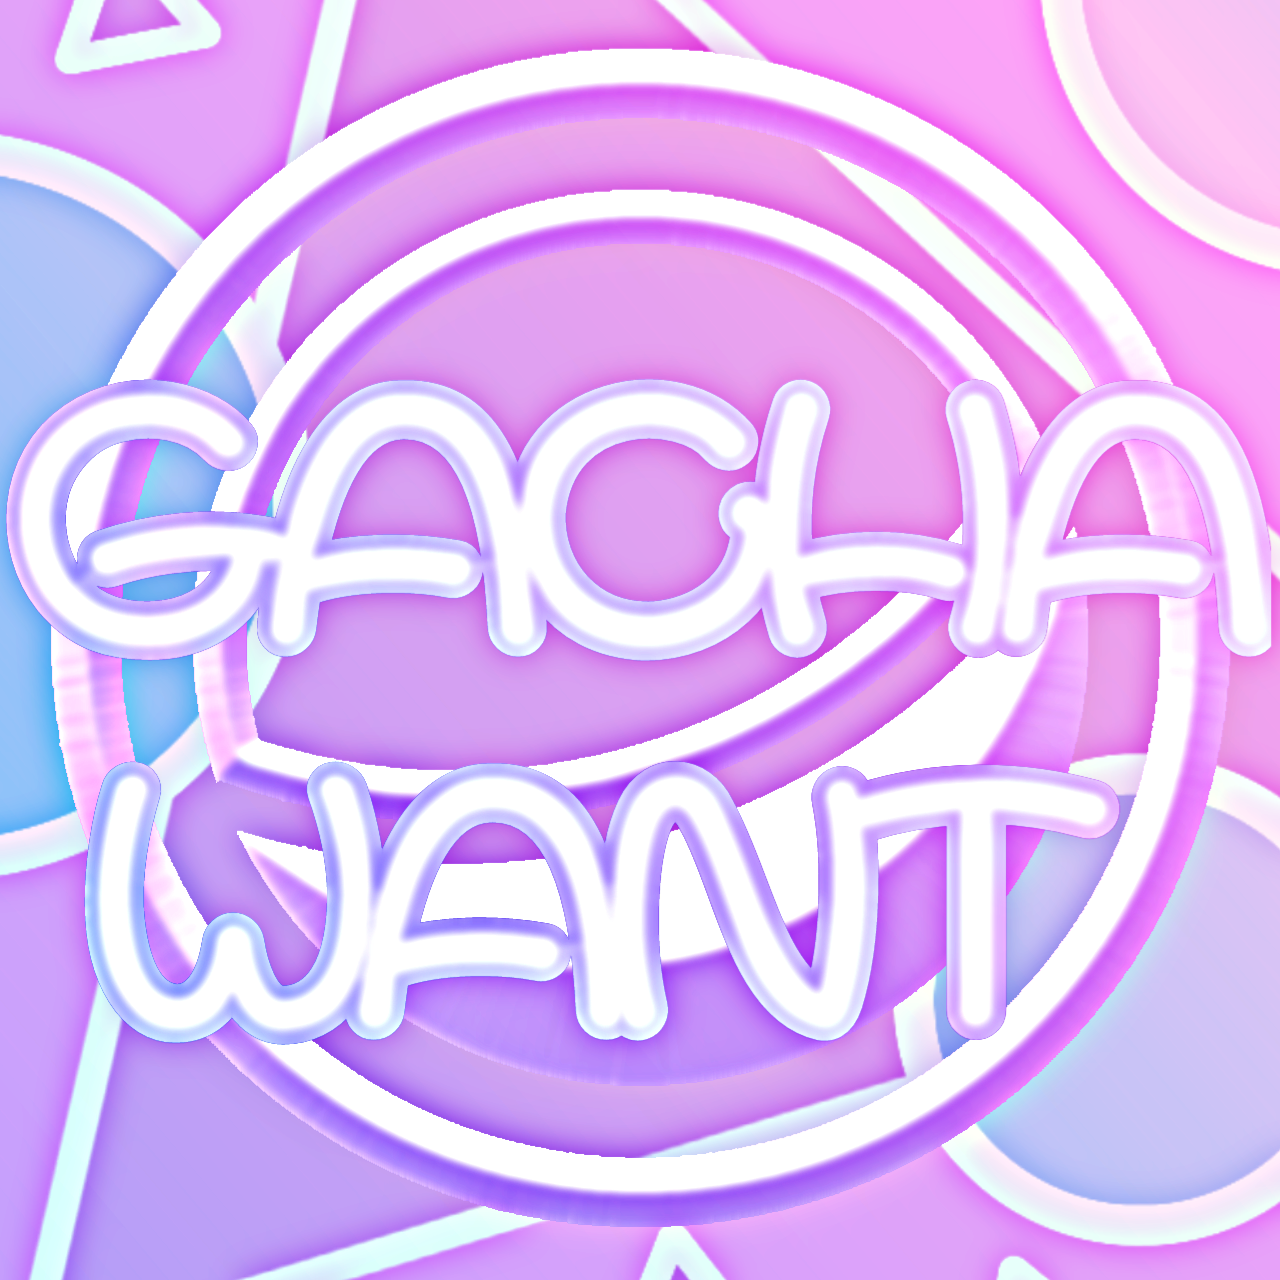 Download Gacha Want android on PC